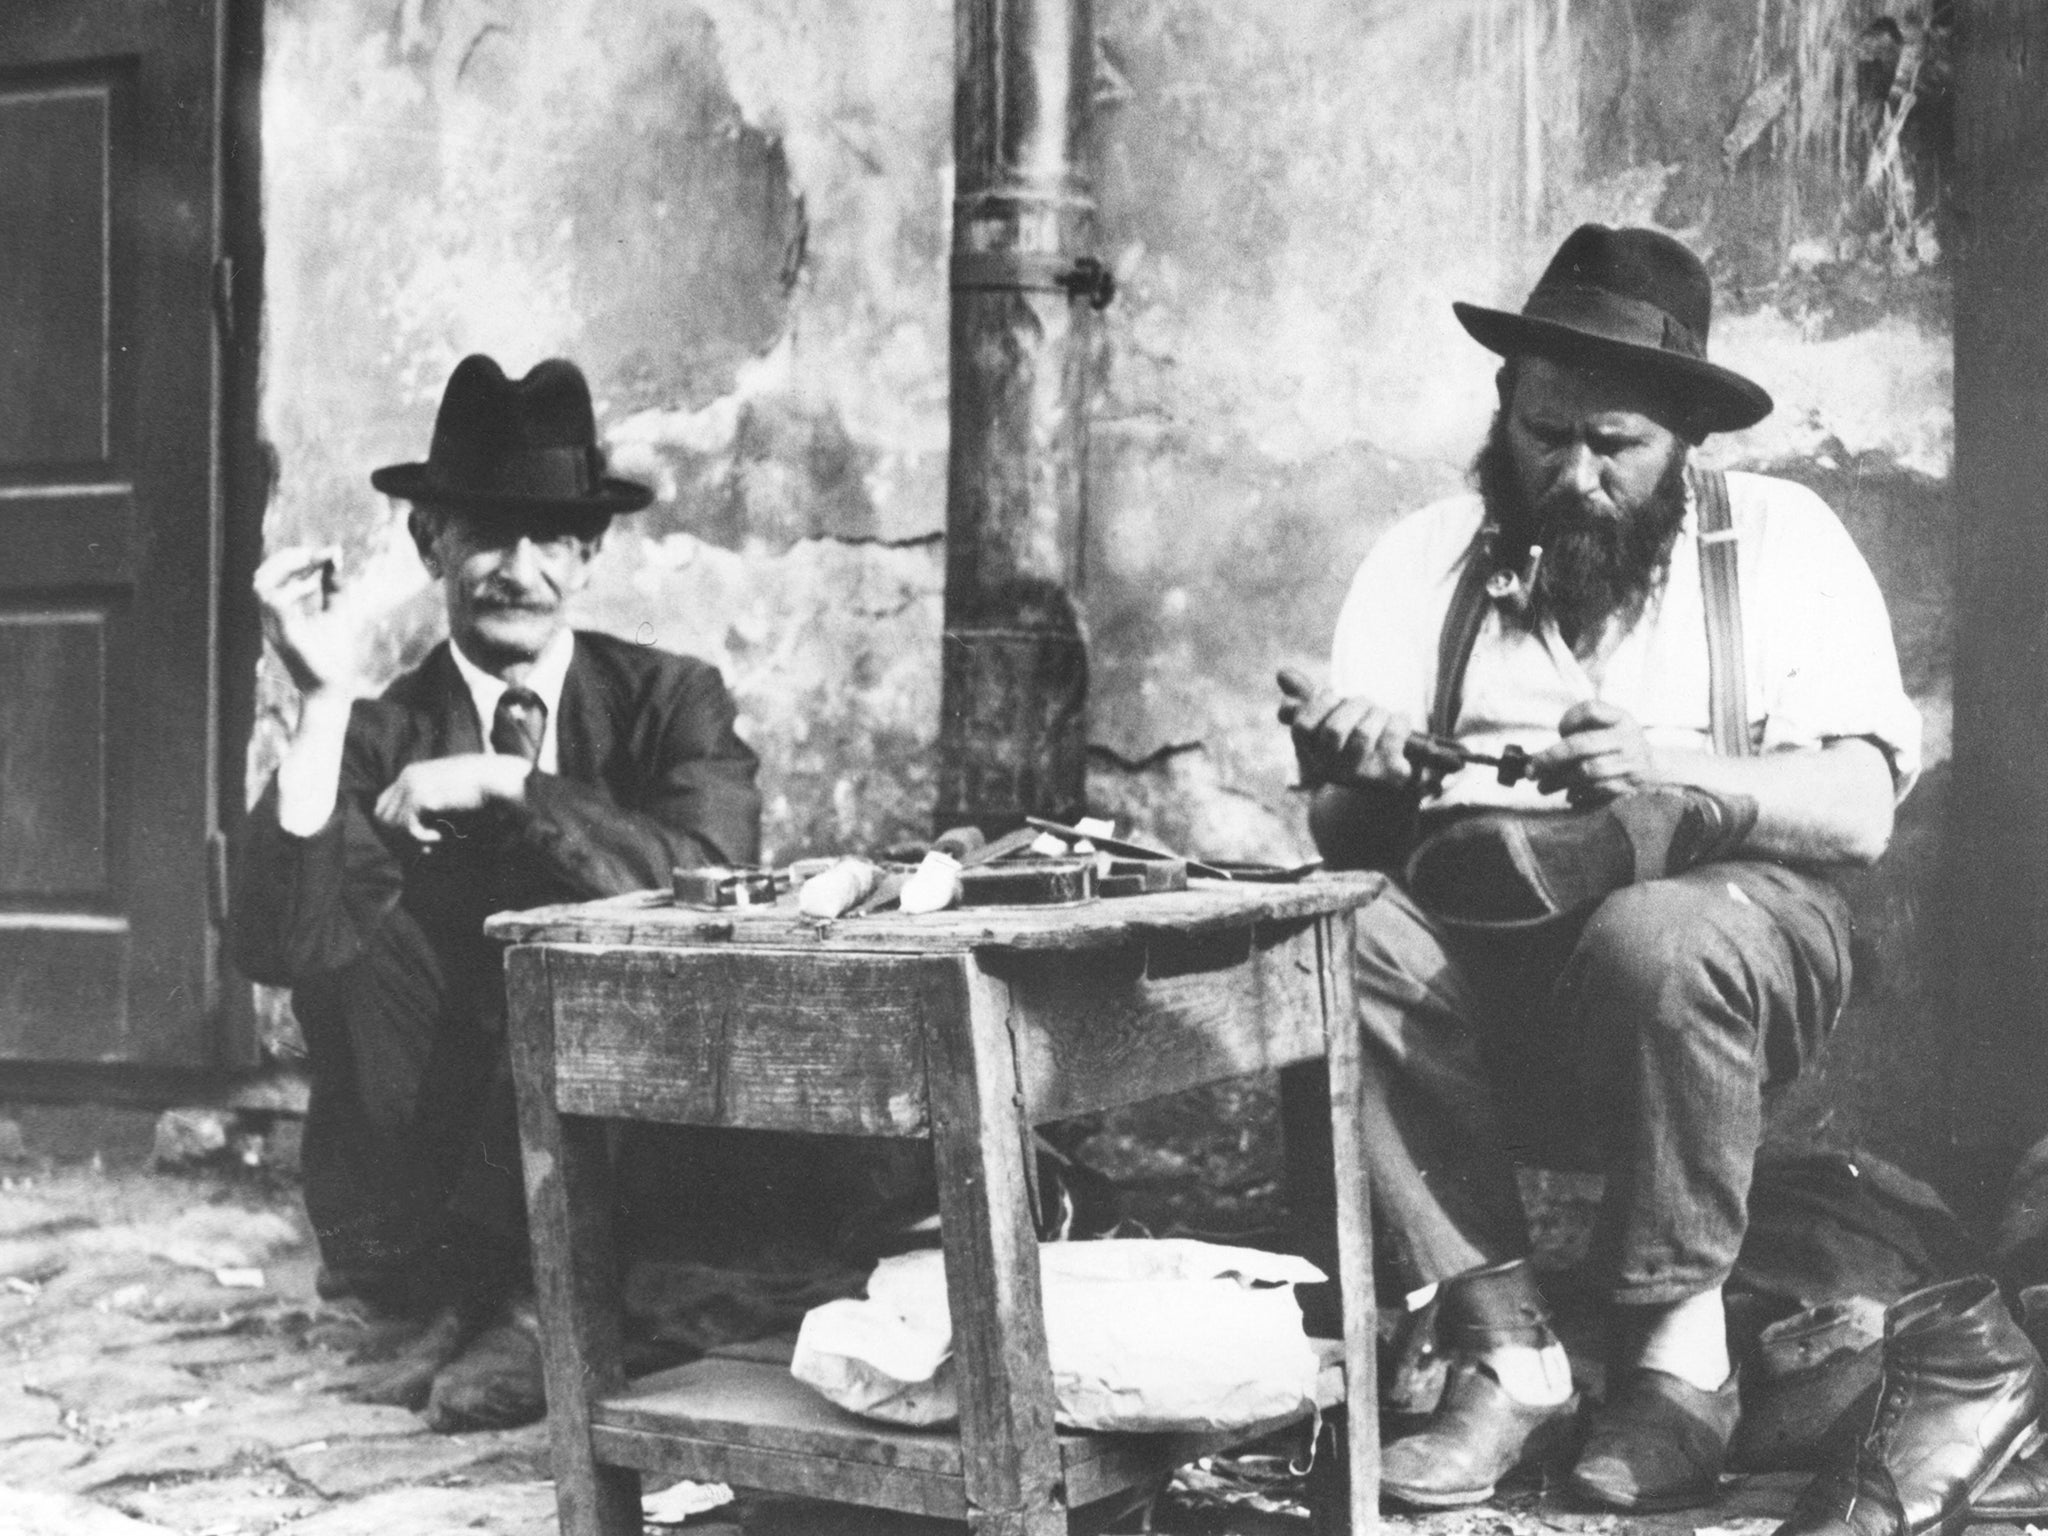 More than 100,000 Jews were crammed into the Lwowghetto during WWII